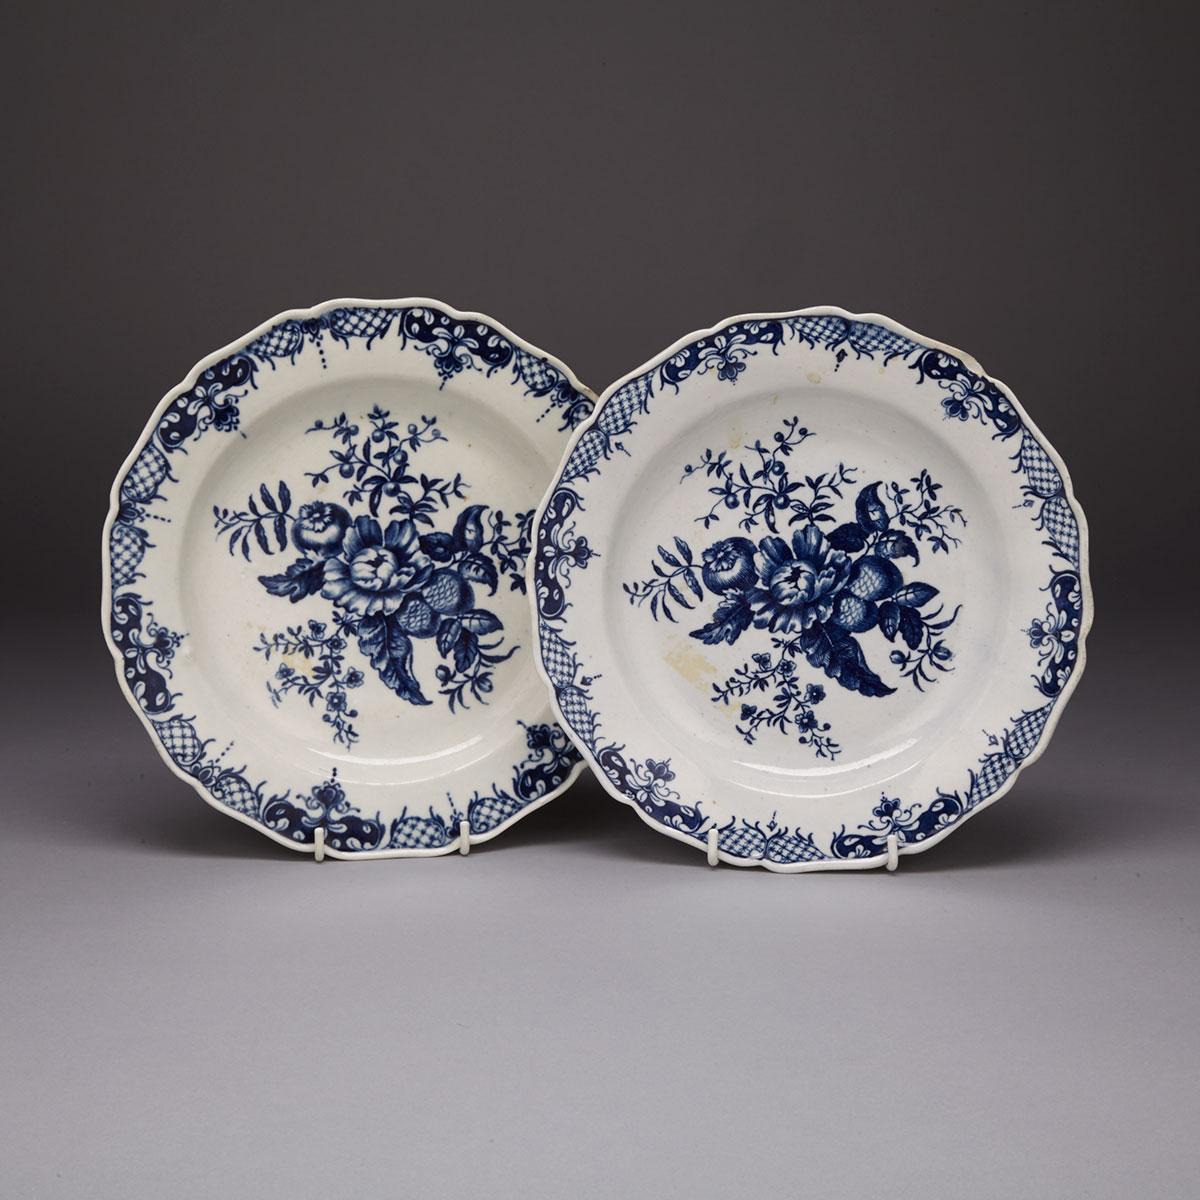 Two Worcester Blue Printed ‘Pine Cone’ Pattern Plates, c.1775